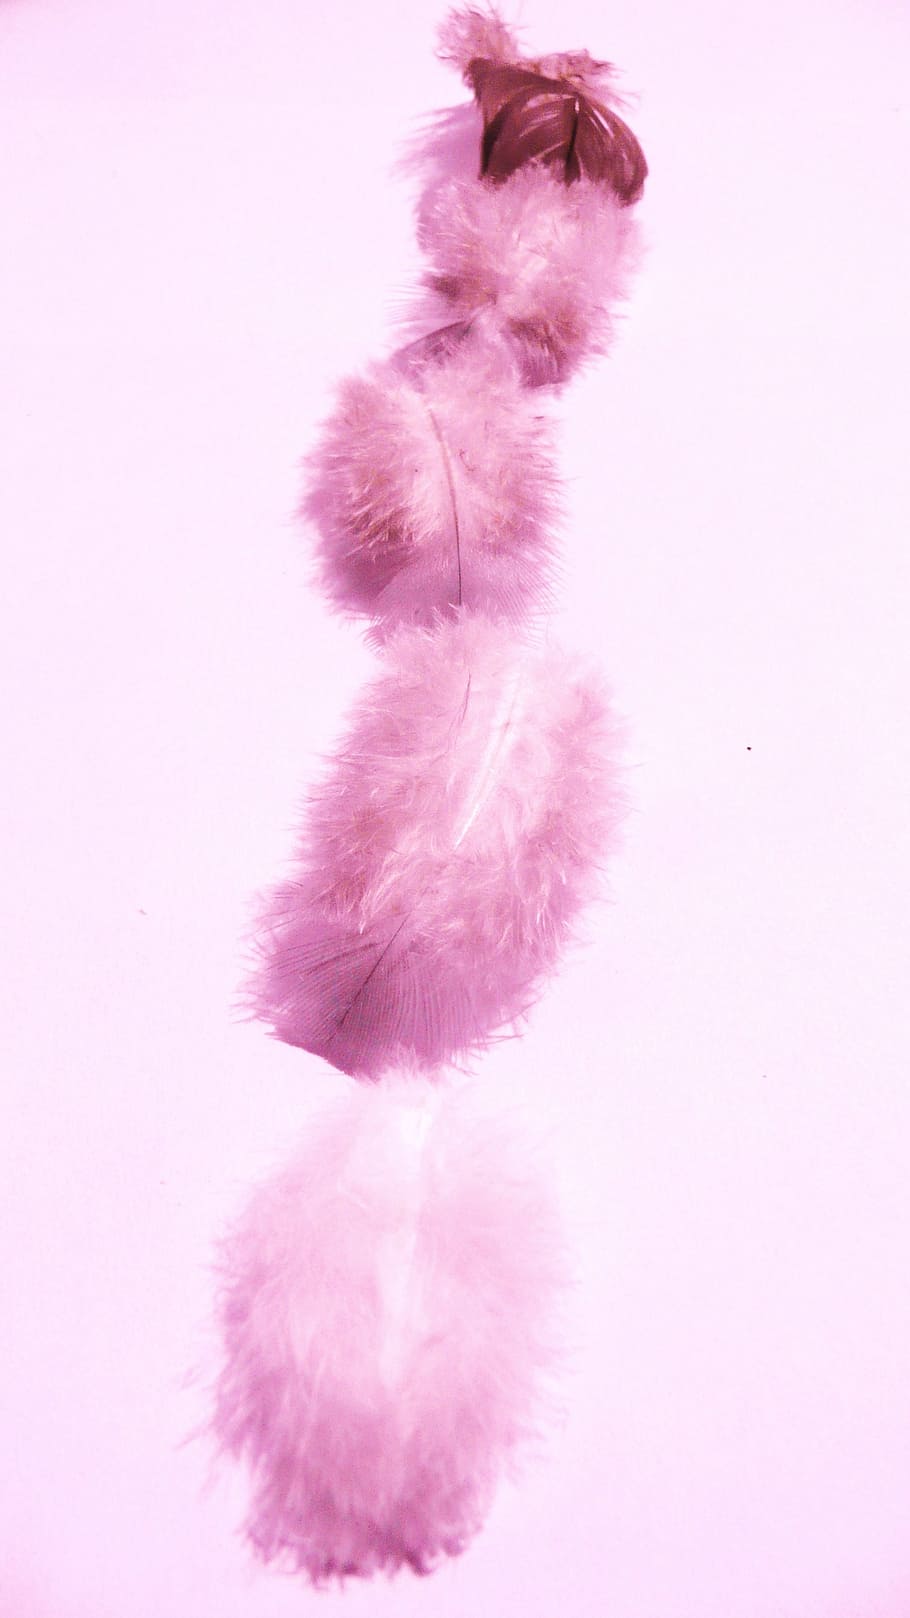 feathers, fluffy, soft, delicate, fluff, softness, purple, lavender, stola, clothing